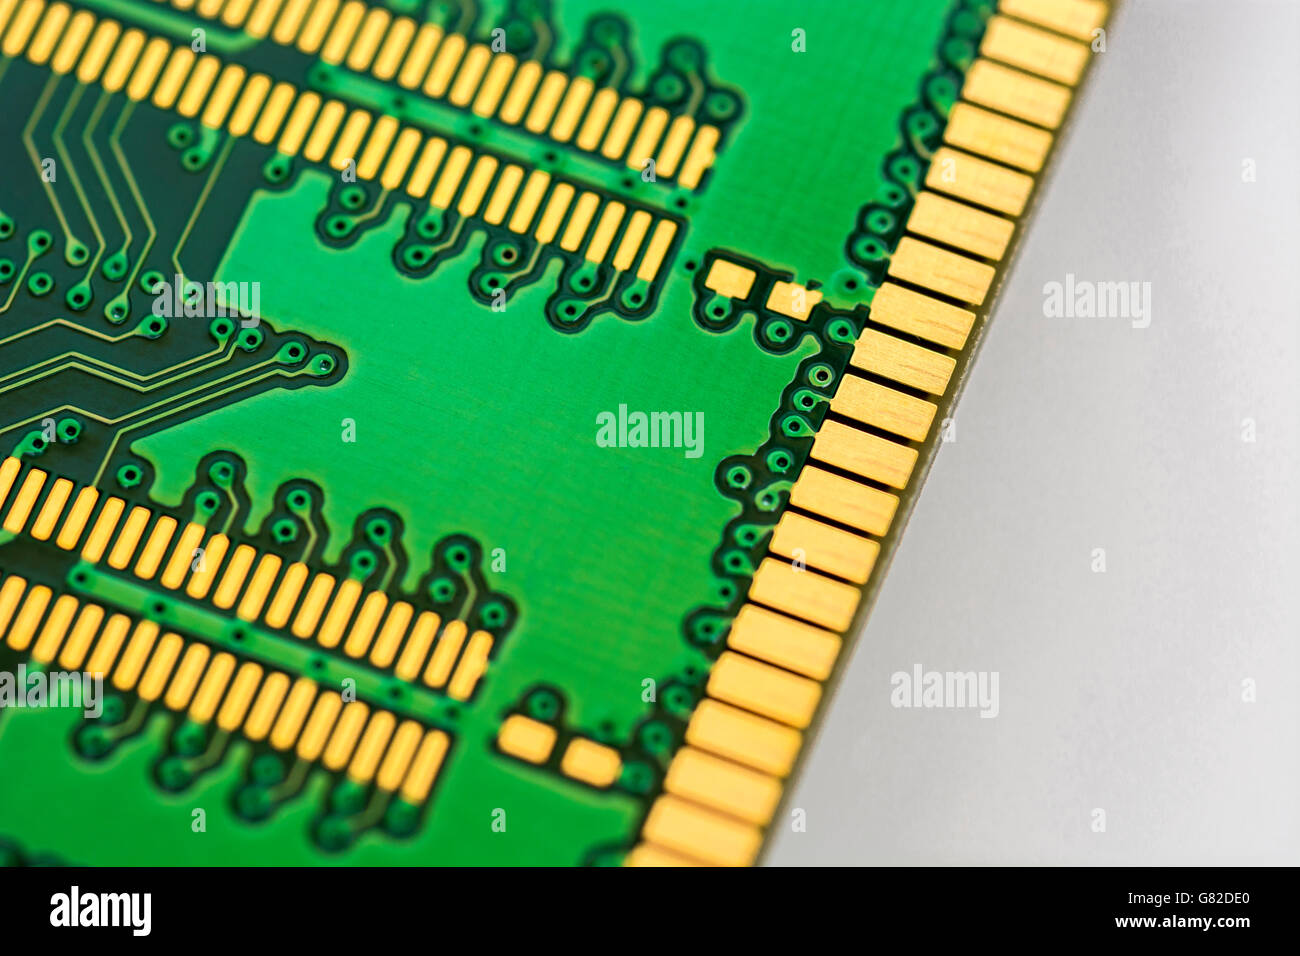 Computer memory concept. Underside of 184-pin DDR SDRAM module showing edge connectors of the DIMM (dual in-line memory module). Stock Photo